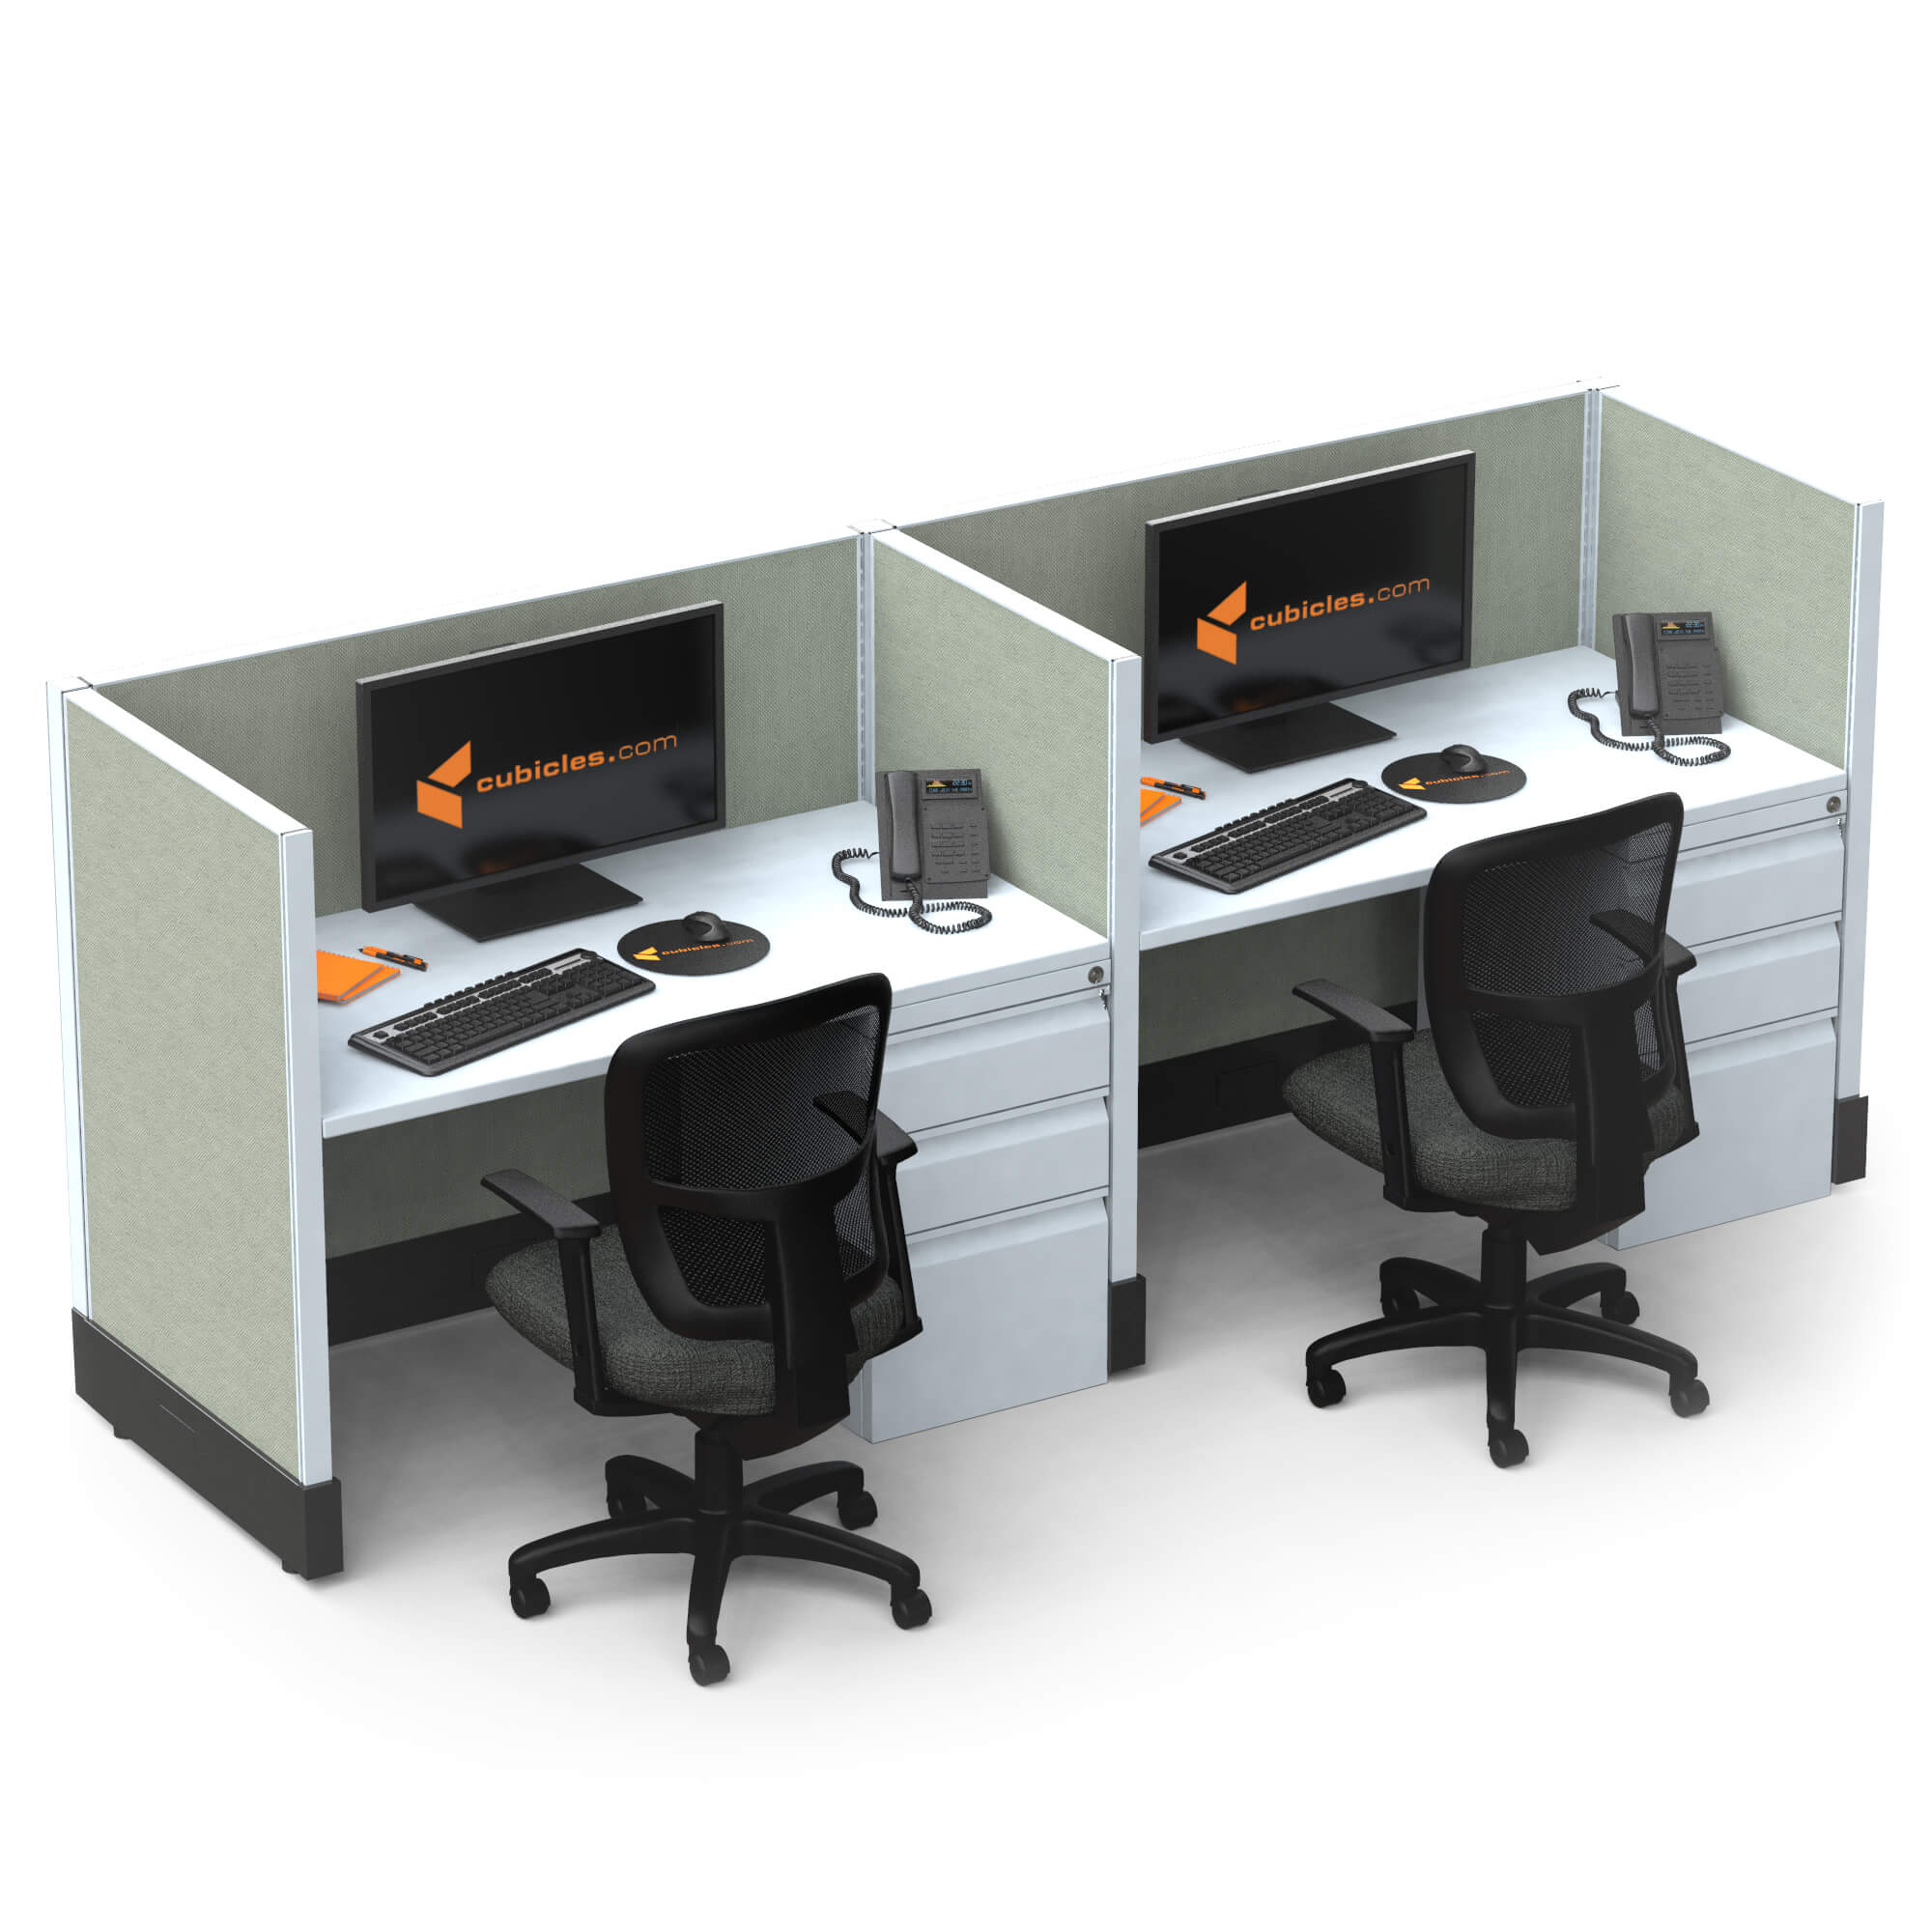 hot-desking-small-office-cubicles-2i-pack.jpg